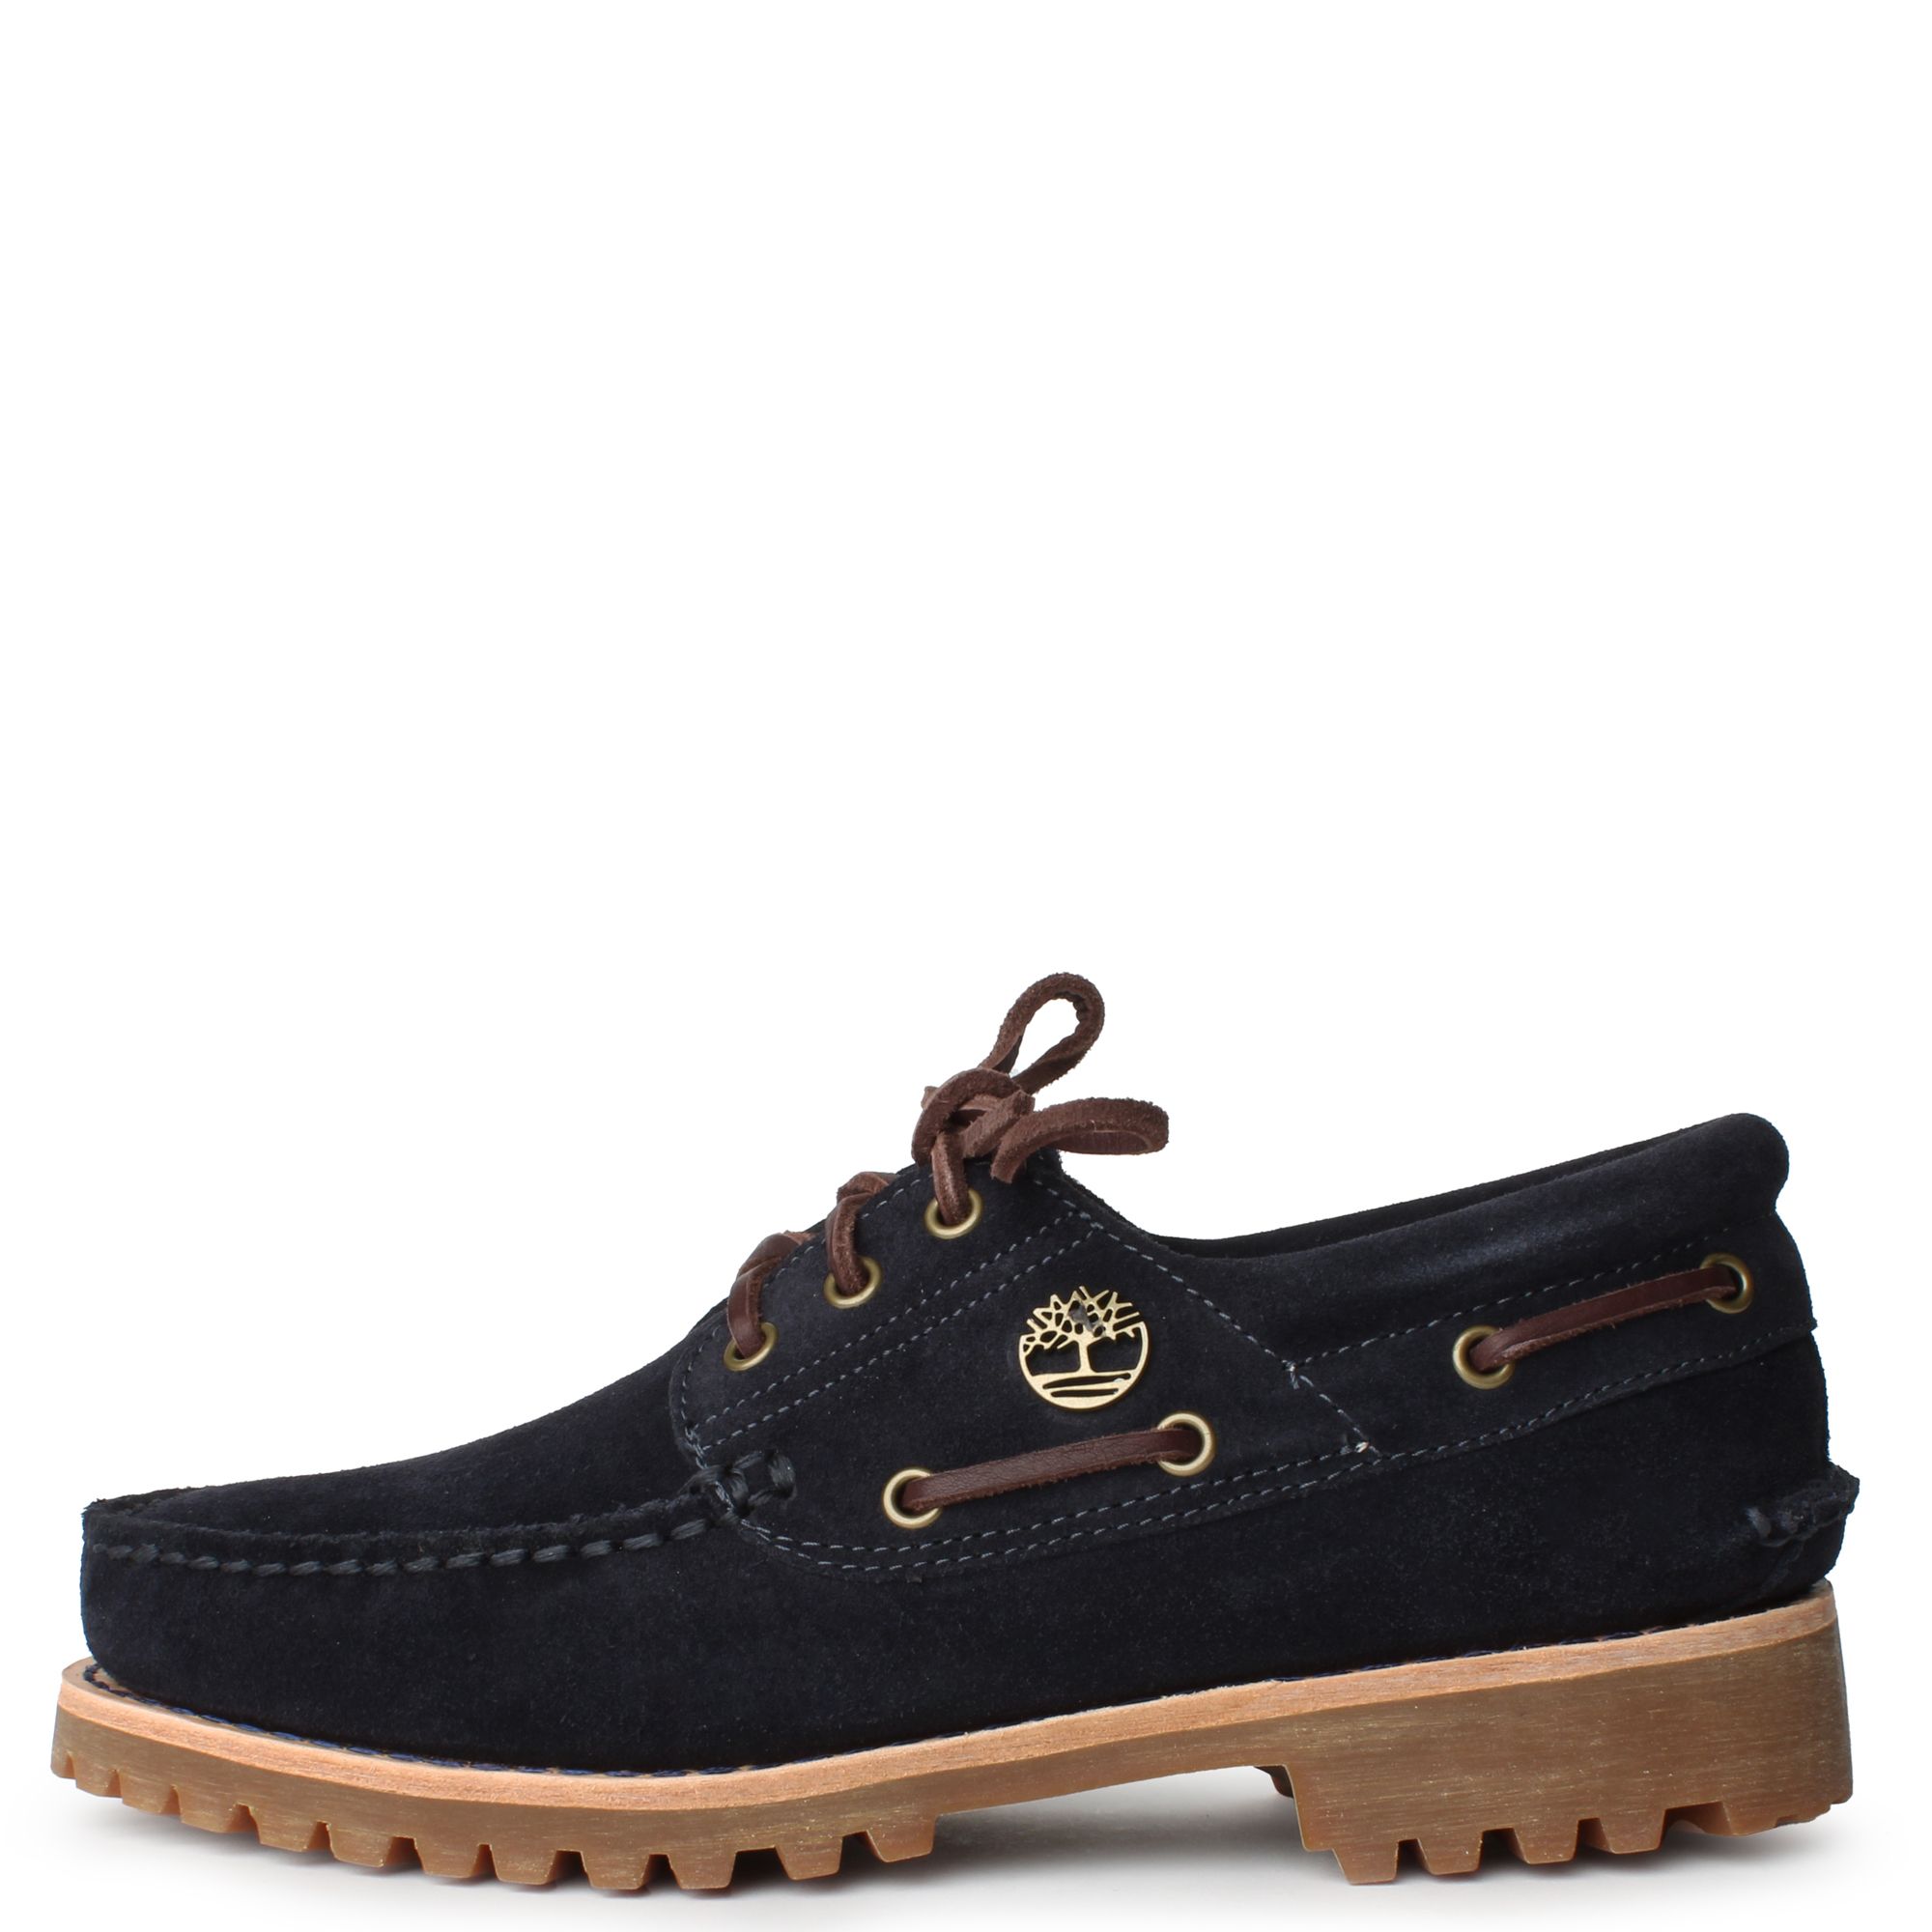 Timberland Authentics 3 Eye leather boat shoes - Brown